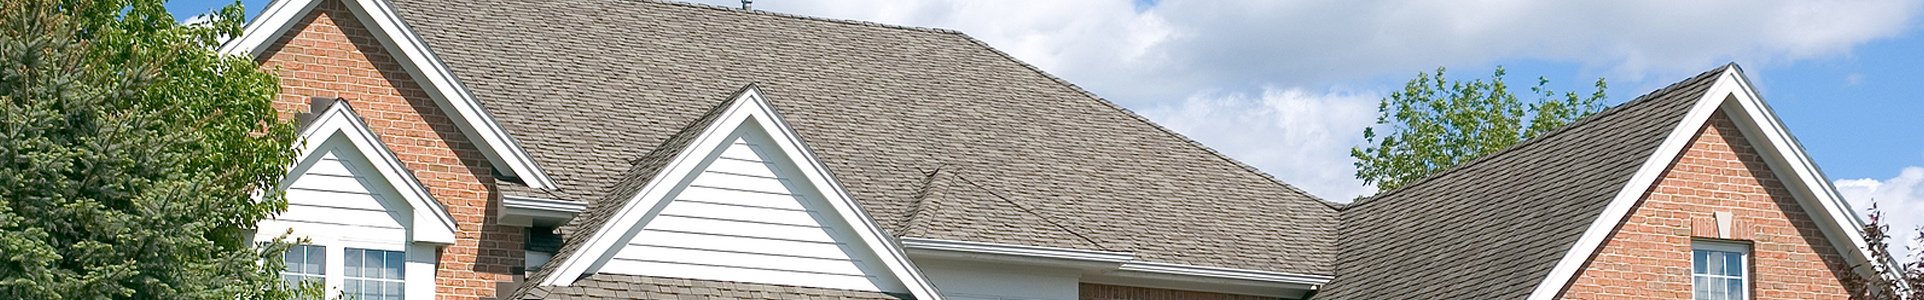 Roofing Tuscarora Roofing